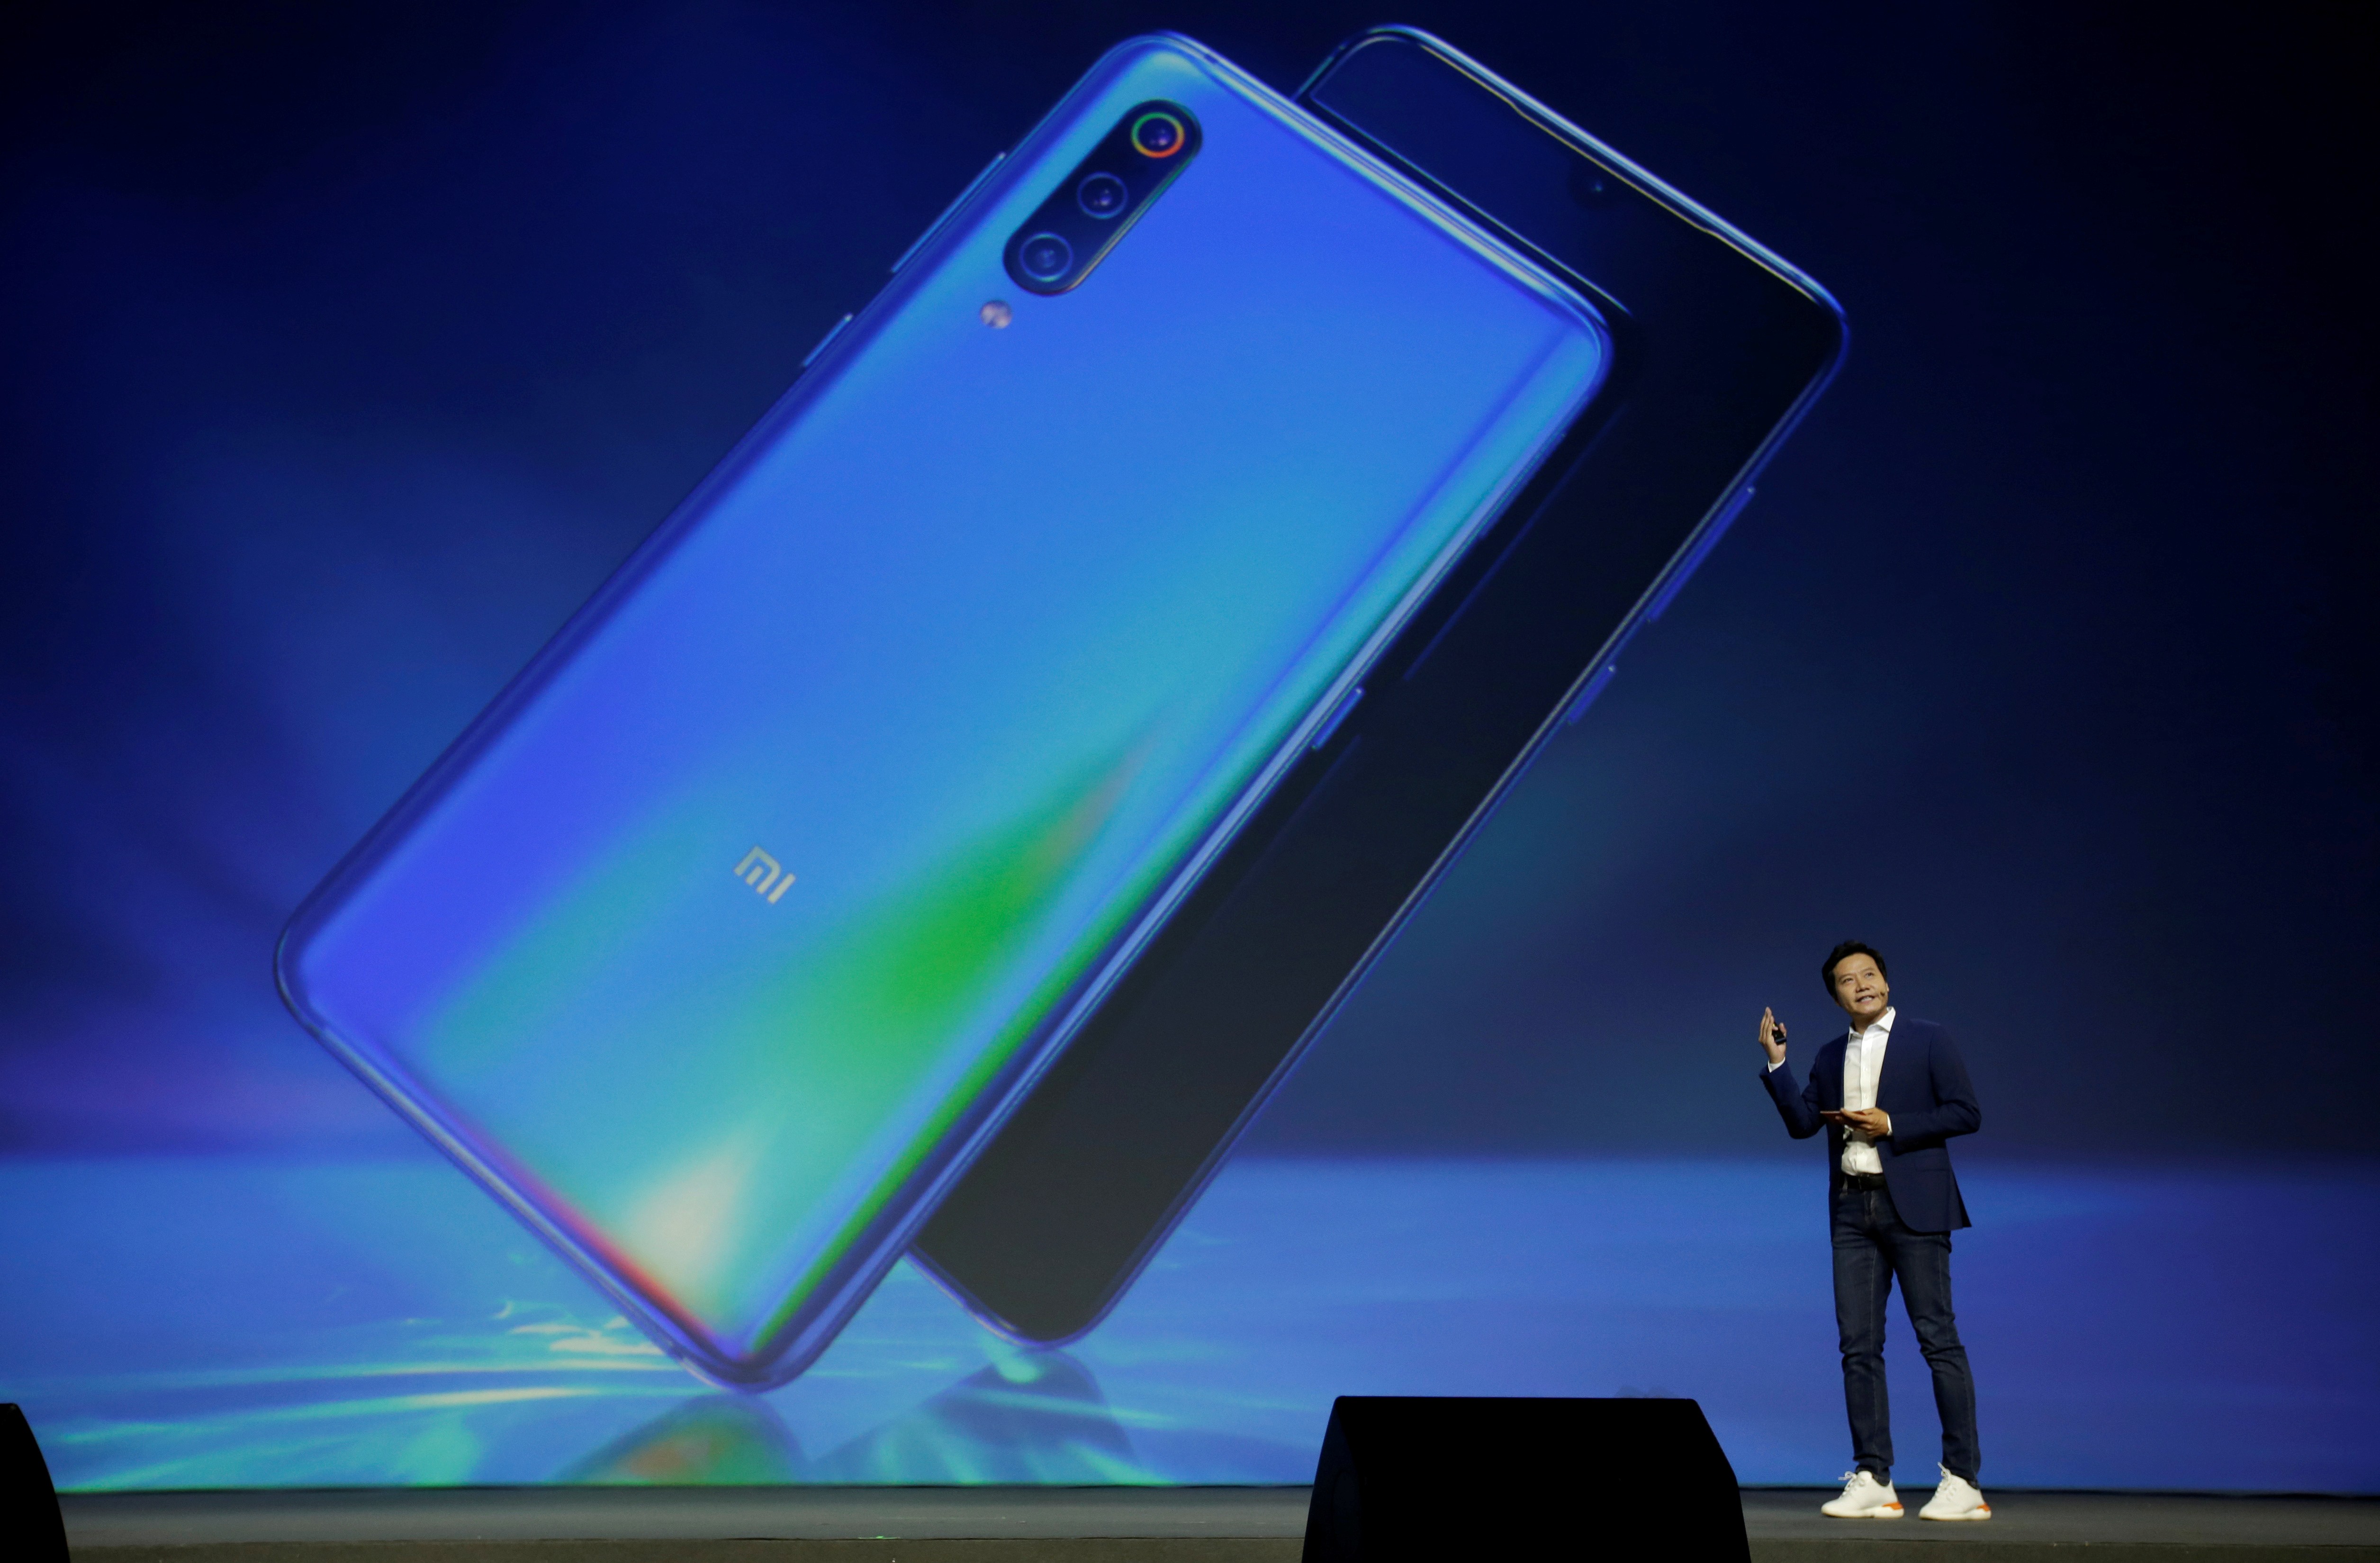 Xiaomi founder and CEO Lei Jun attends a launch ceremony of the new flagship phone Xiaomi Mi 9 in Beijing on February 20, 2019. Photo: Reuters